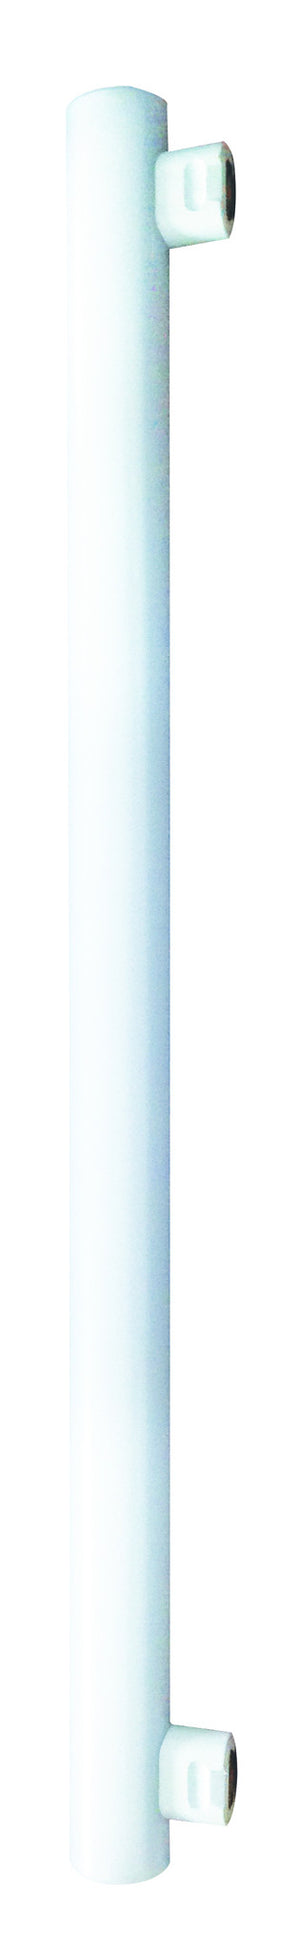 997006 - Tube Lateral LED S14S 300mm 8W 2700K 640Lm GS TUBE The Lampco - The Lamp Company